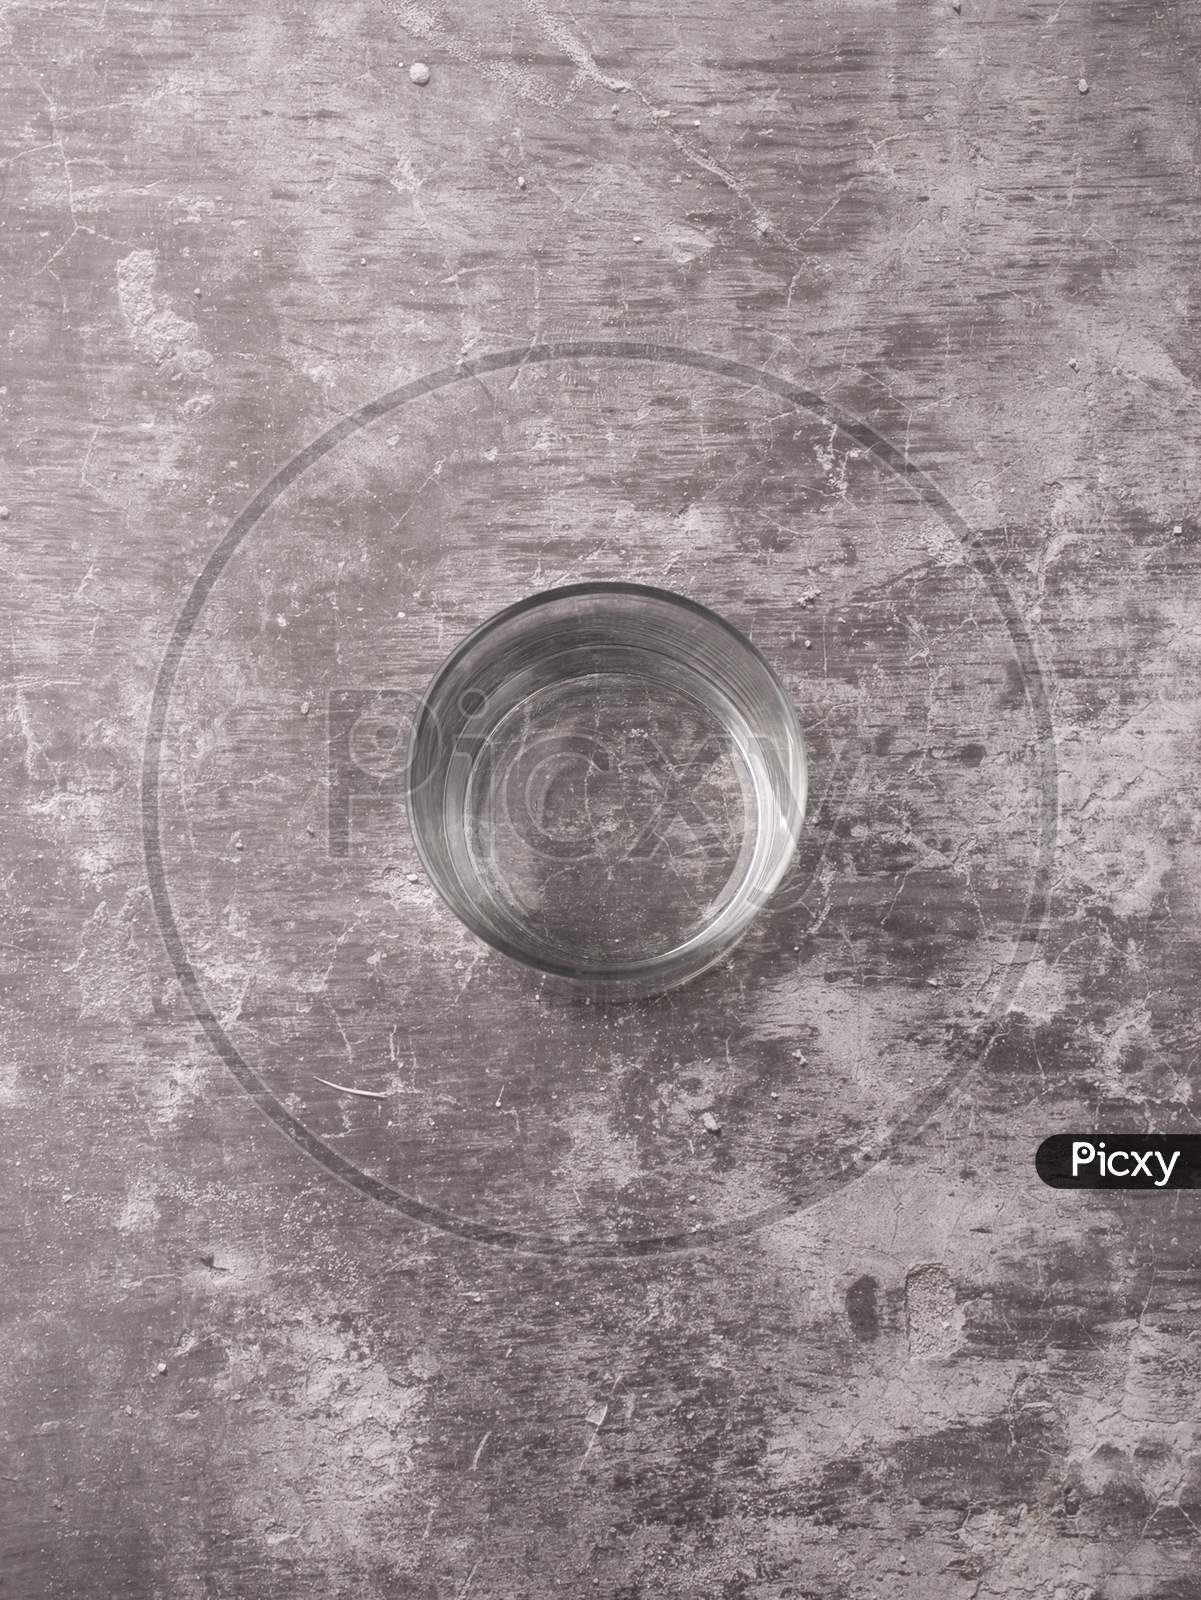 Empty glass with white background stock image.